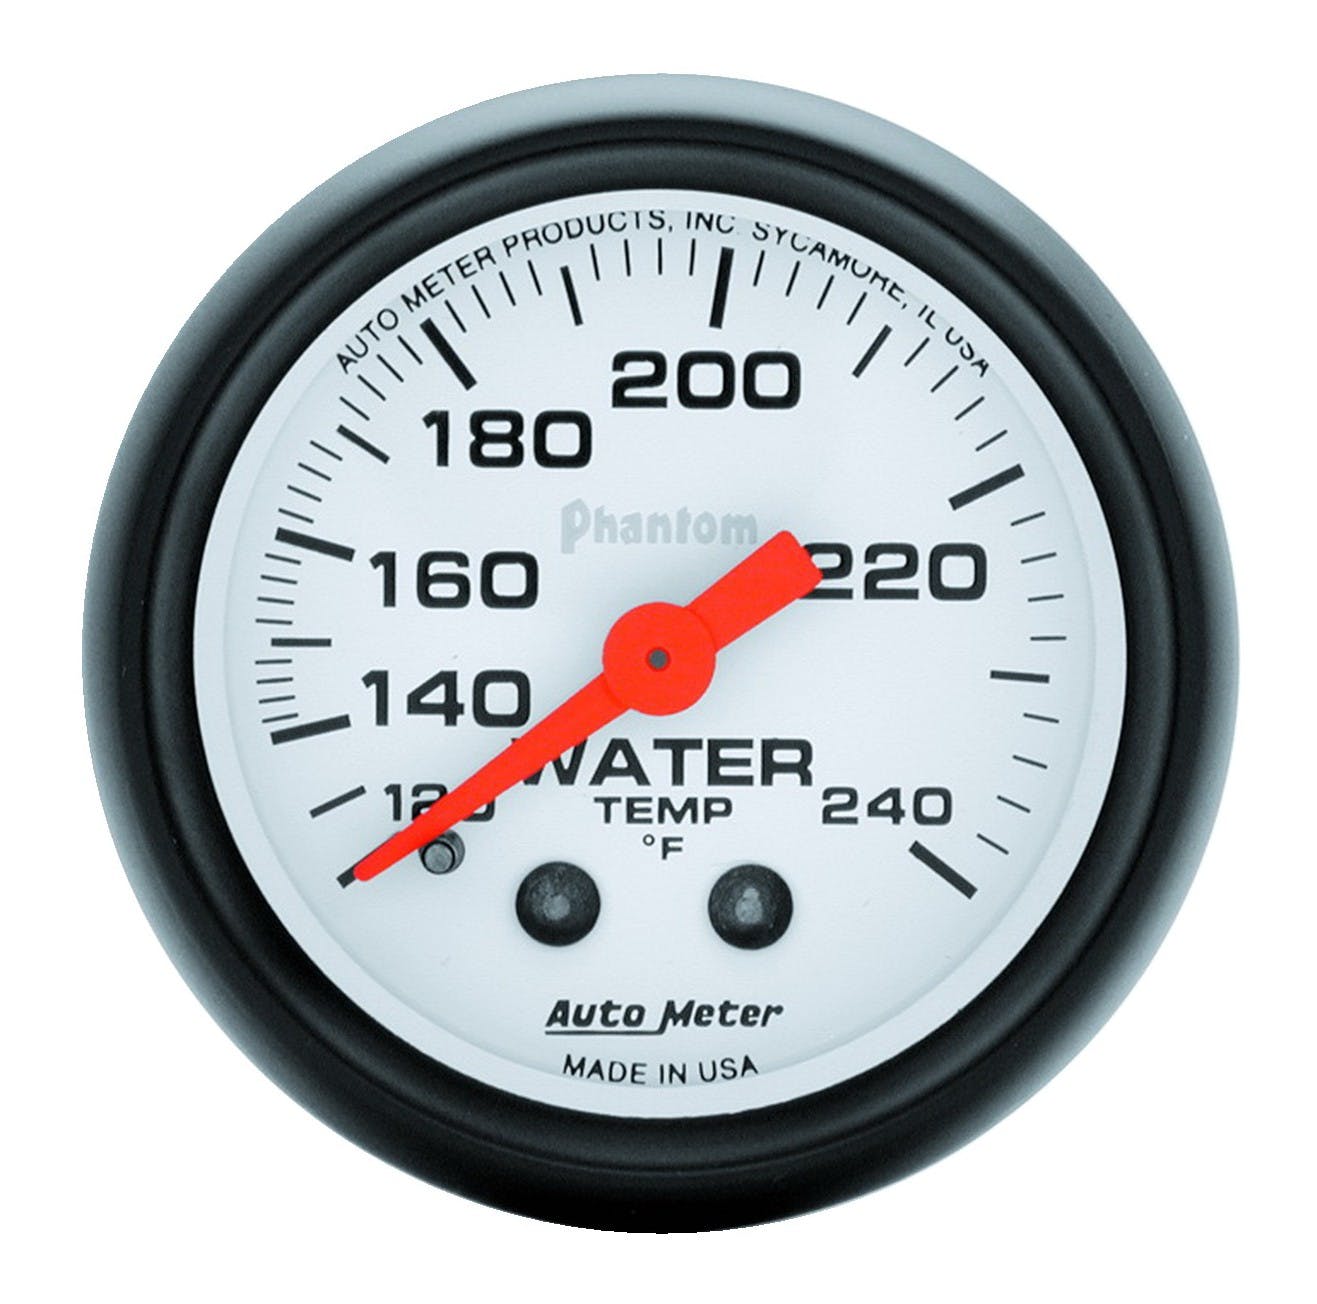 AutoMeter Products 5732 Water Temp 120-240 F